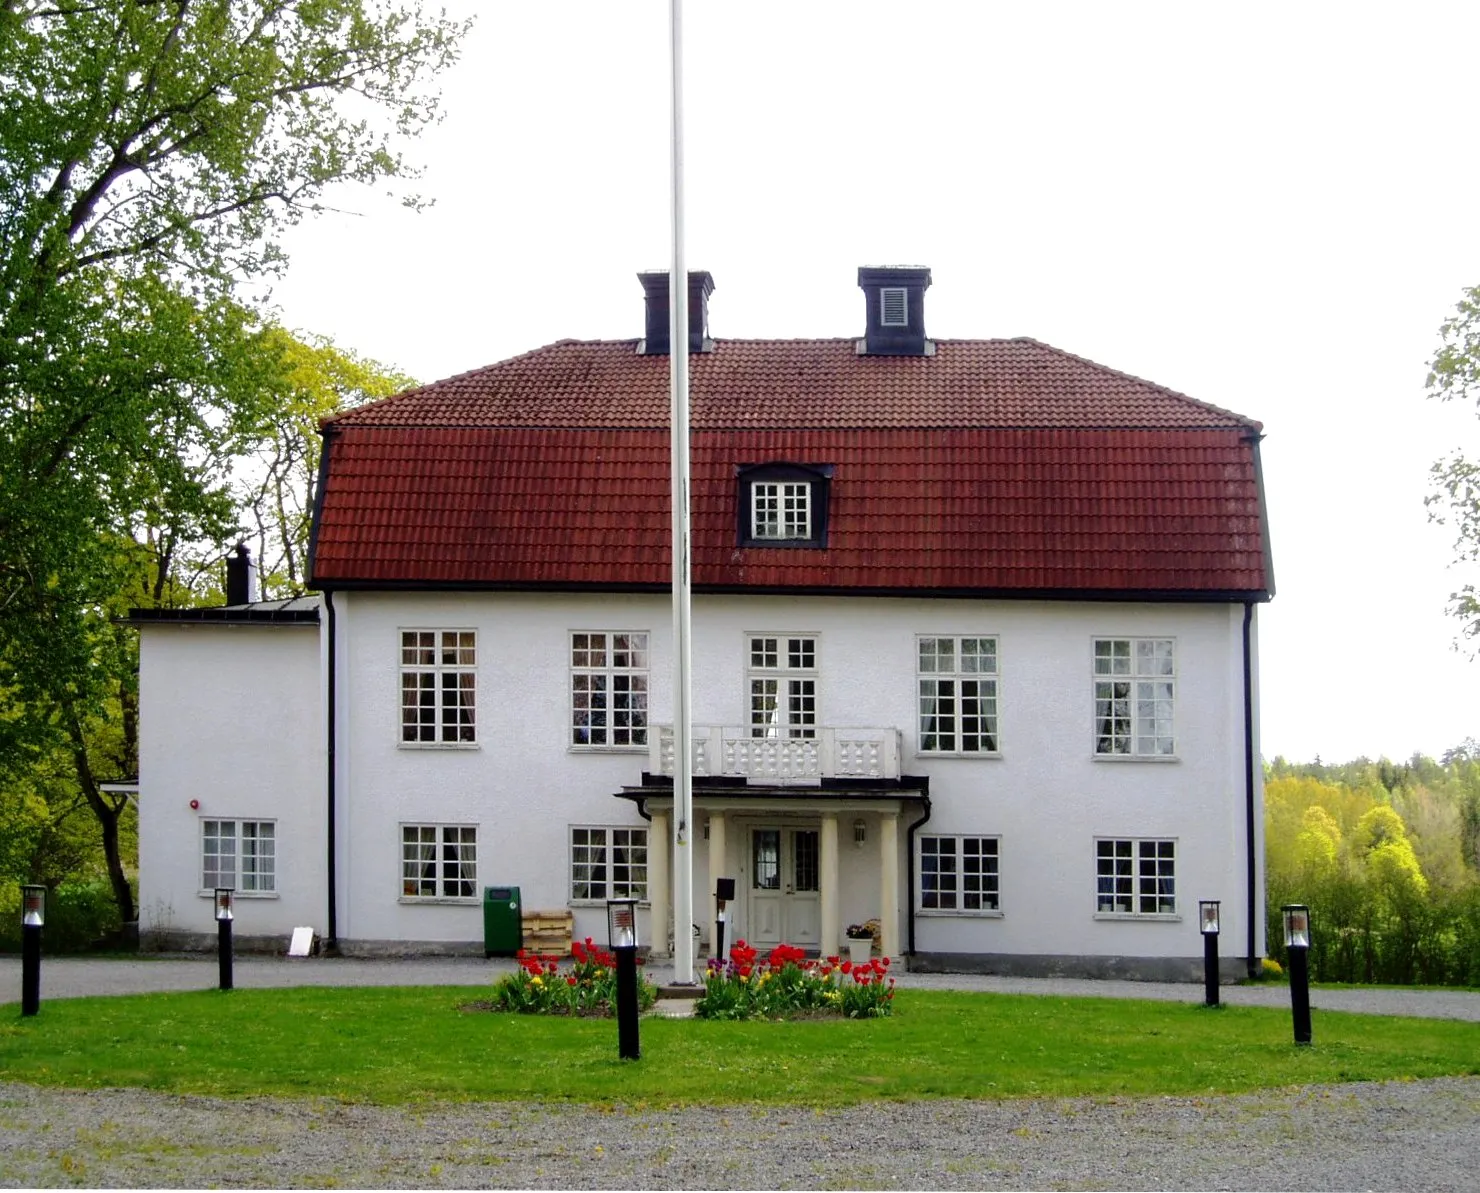 Photo showing: School for agriculture, Haninge municipality, Sweden